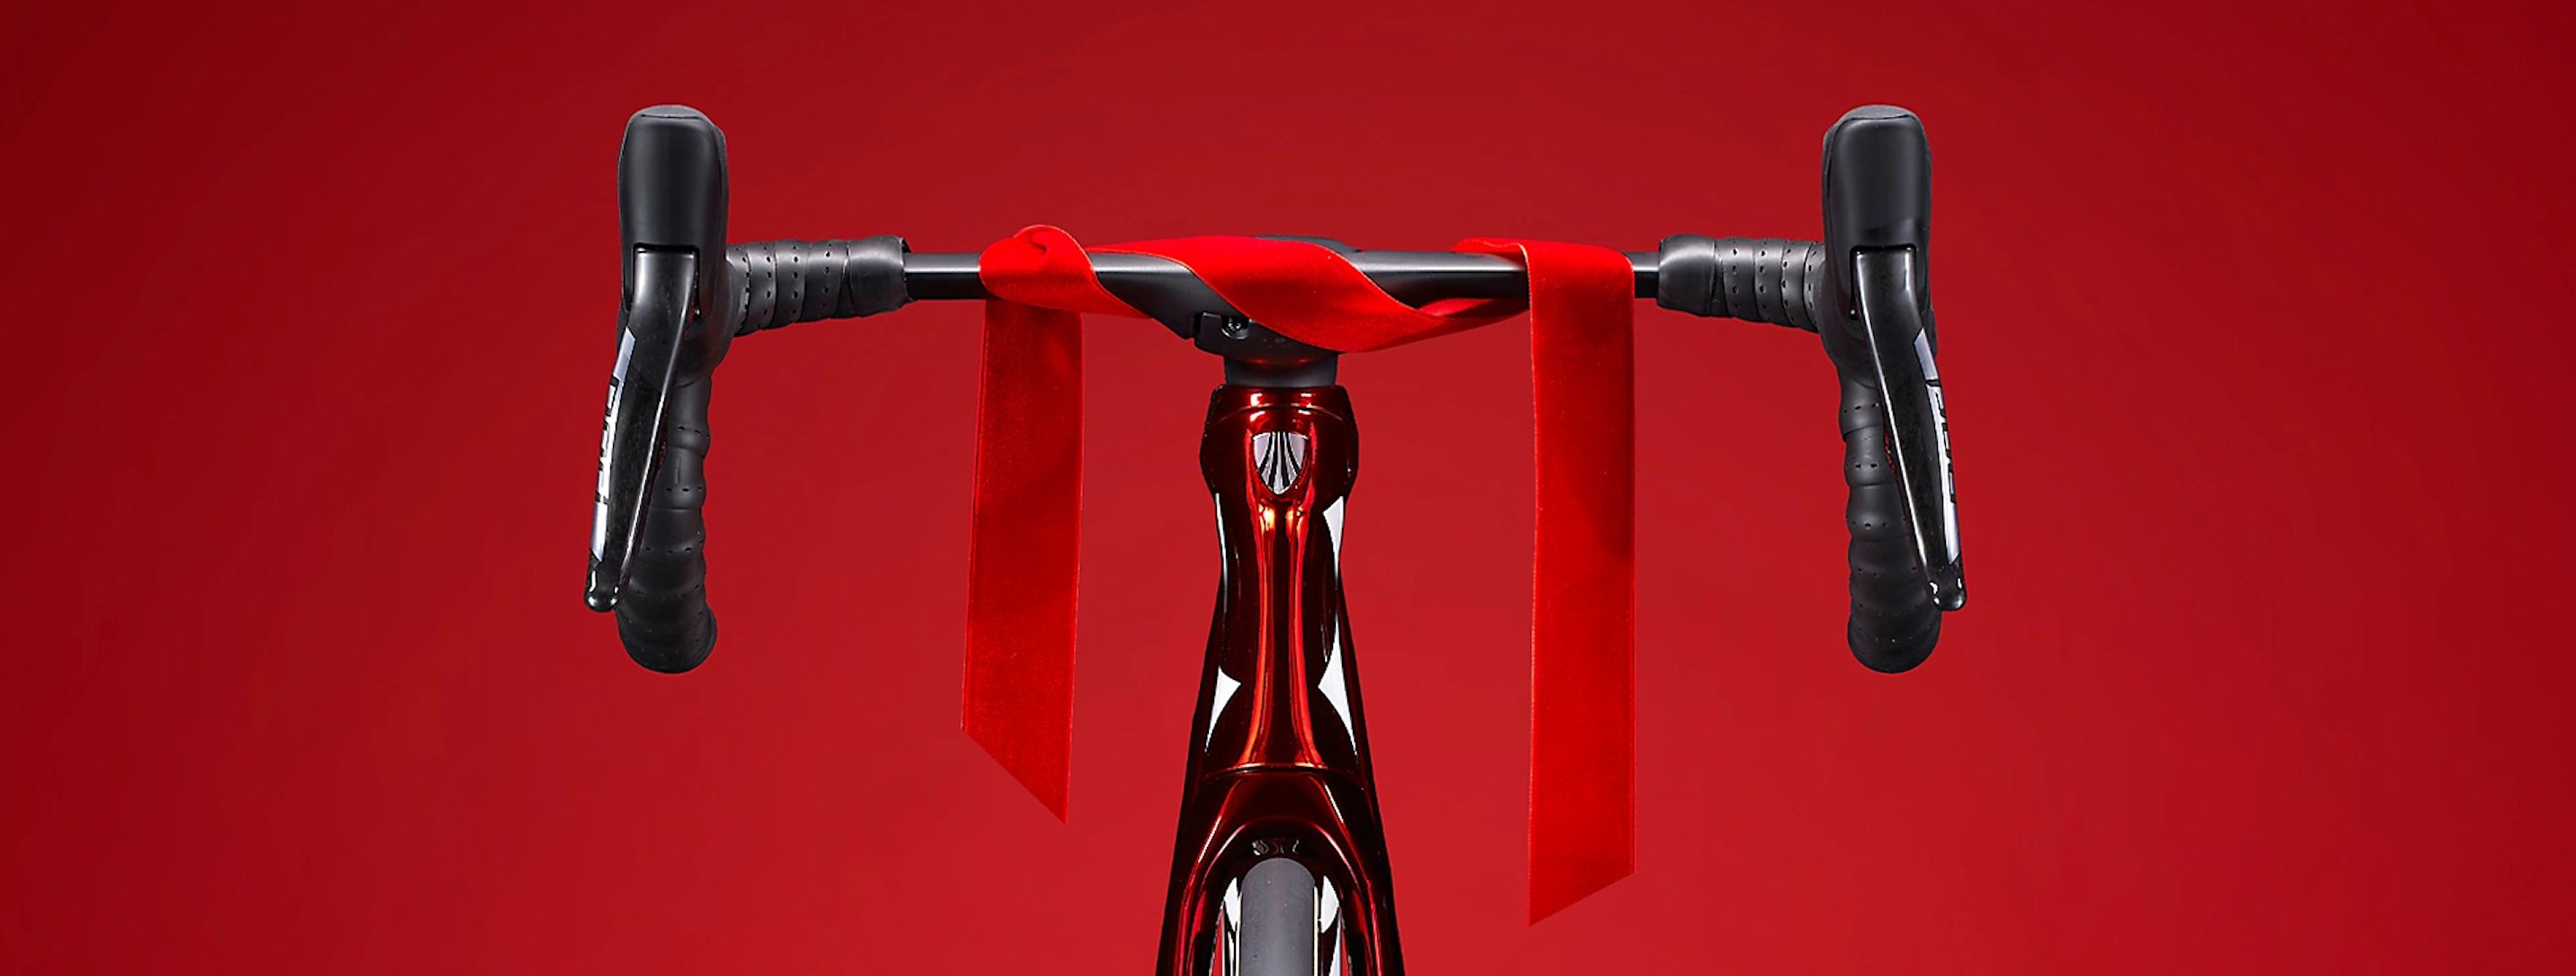 Cycling Festive Gift Guide